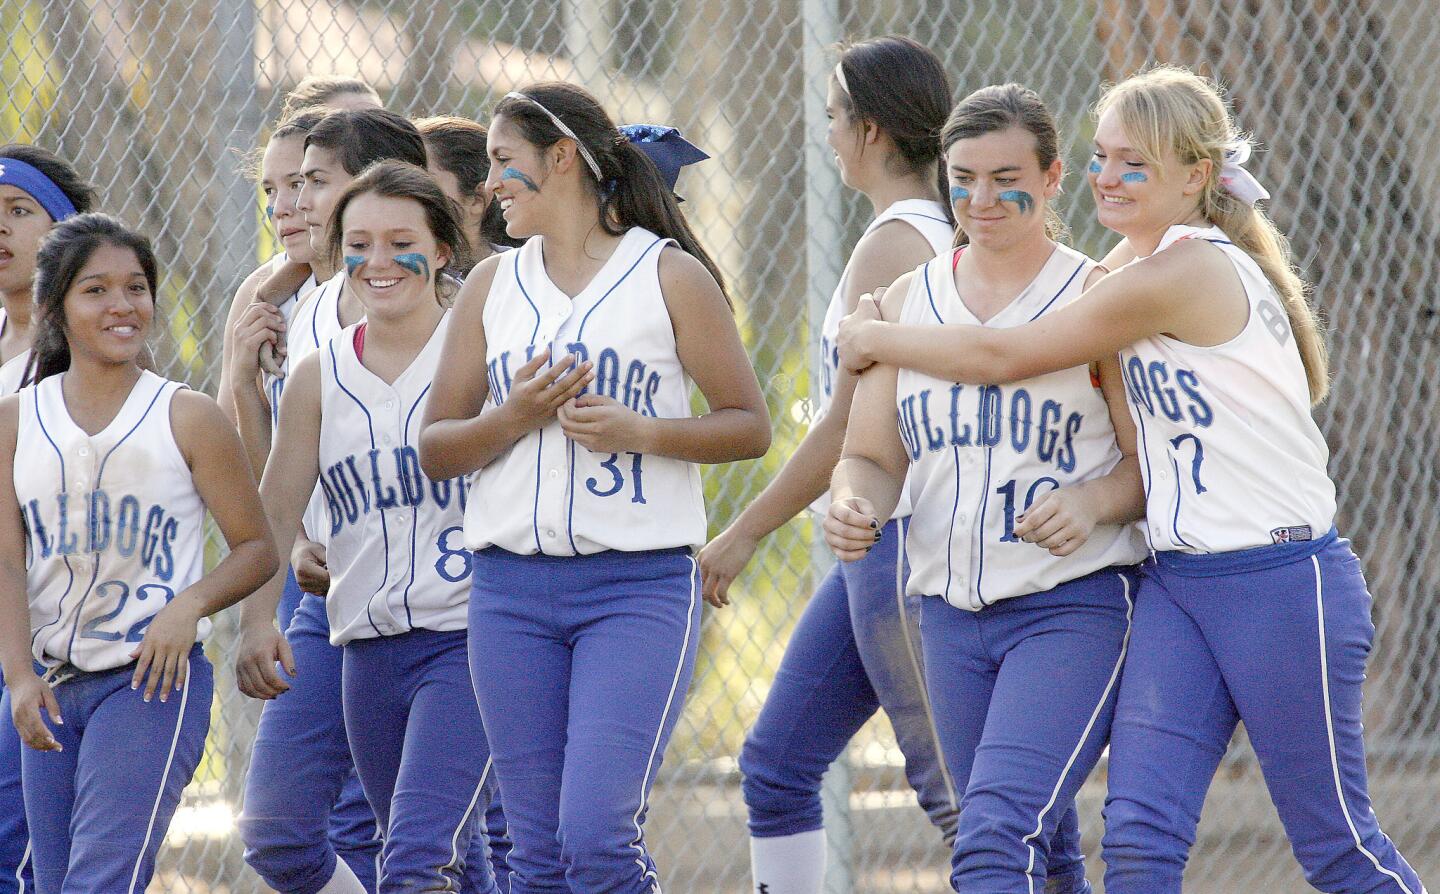 The Burbank High girls softball team leaves the field after losing a CIF second-round playoff game to Sunny Hills on Tuesday, May 21, 2013.